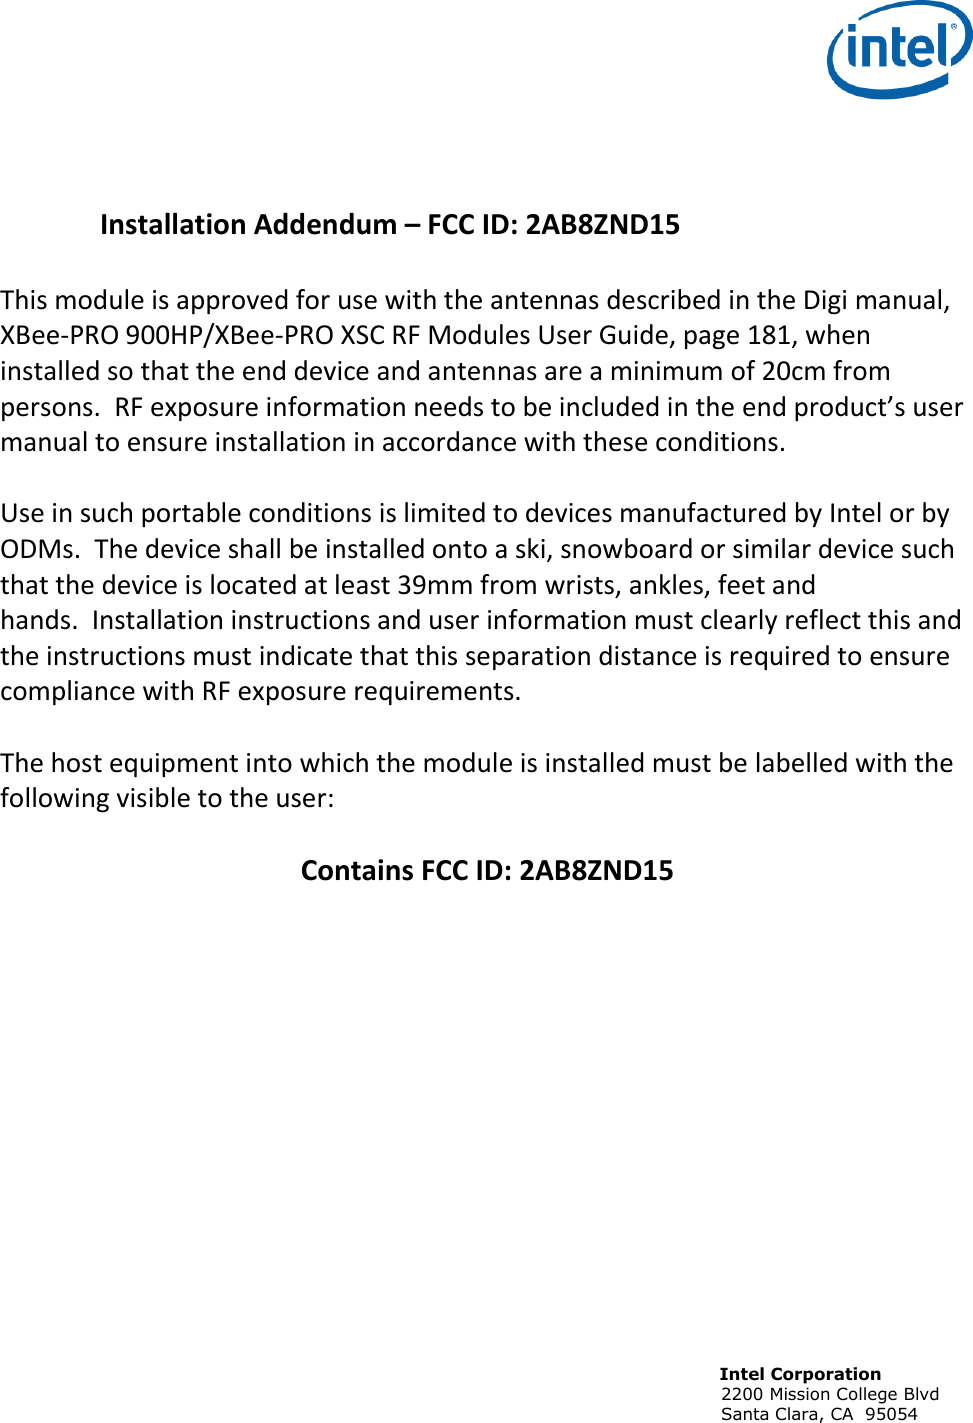                                                                                                                              Intel Corporation                                                                                                                            2200 Mission College Blvd                                                                                                                            Santa Clara, CA  95054     Installation Addendum – FCC ID: 2AB8ZND15   This module is approved for use with the antennas described in the Digi manual,  XBee-PRO 900HP/XBee-PRO XSC RF Modules User Guide, page 181, when installed so that the end device and antennas are a minimum of 20cm from persons.  RF exposure information needs to be included in the end product’s user manual to ensure installation in accordance with these conditions.   Use in such portable conditions is limited to devices manufactured by Intel or by ODMs.  The device shall be installed onto a ski, snowboard or similar device such that the device is located at least 39mm from wrists, ankles, feet and hands.  Installation instructions and user information must clearly reflect this and the instructions must indicate that this separation distance is required to ensure compliance with RF exposure requirements.   The host equipment into which the module is installed must be labelled with the following visible to the user:  Contains FCC ID: 2AB8ZND15 